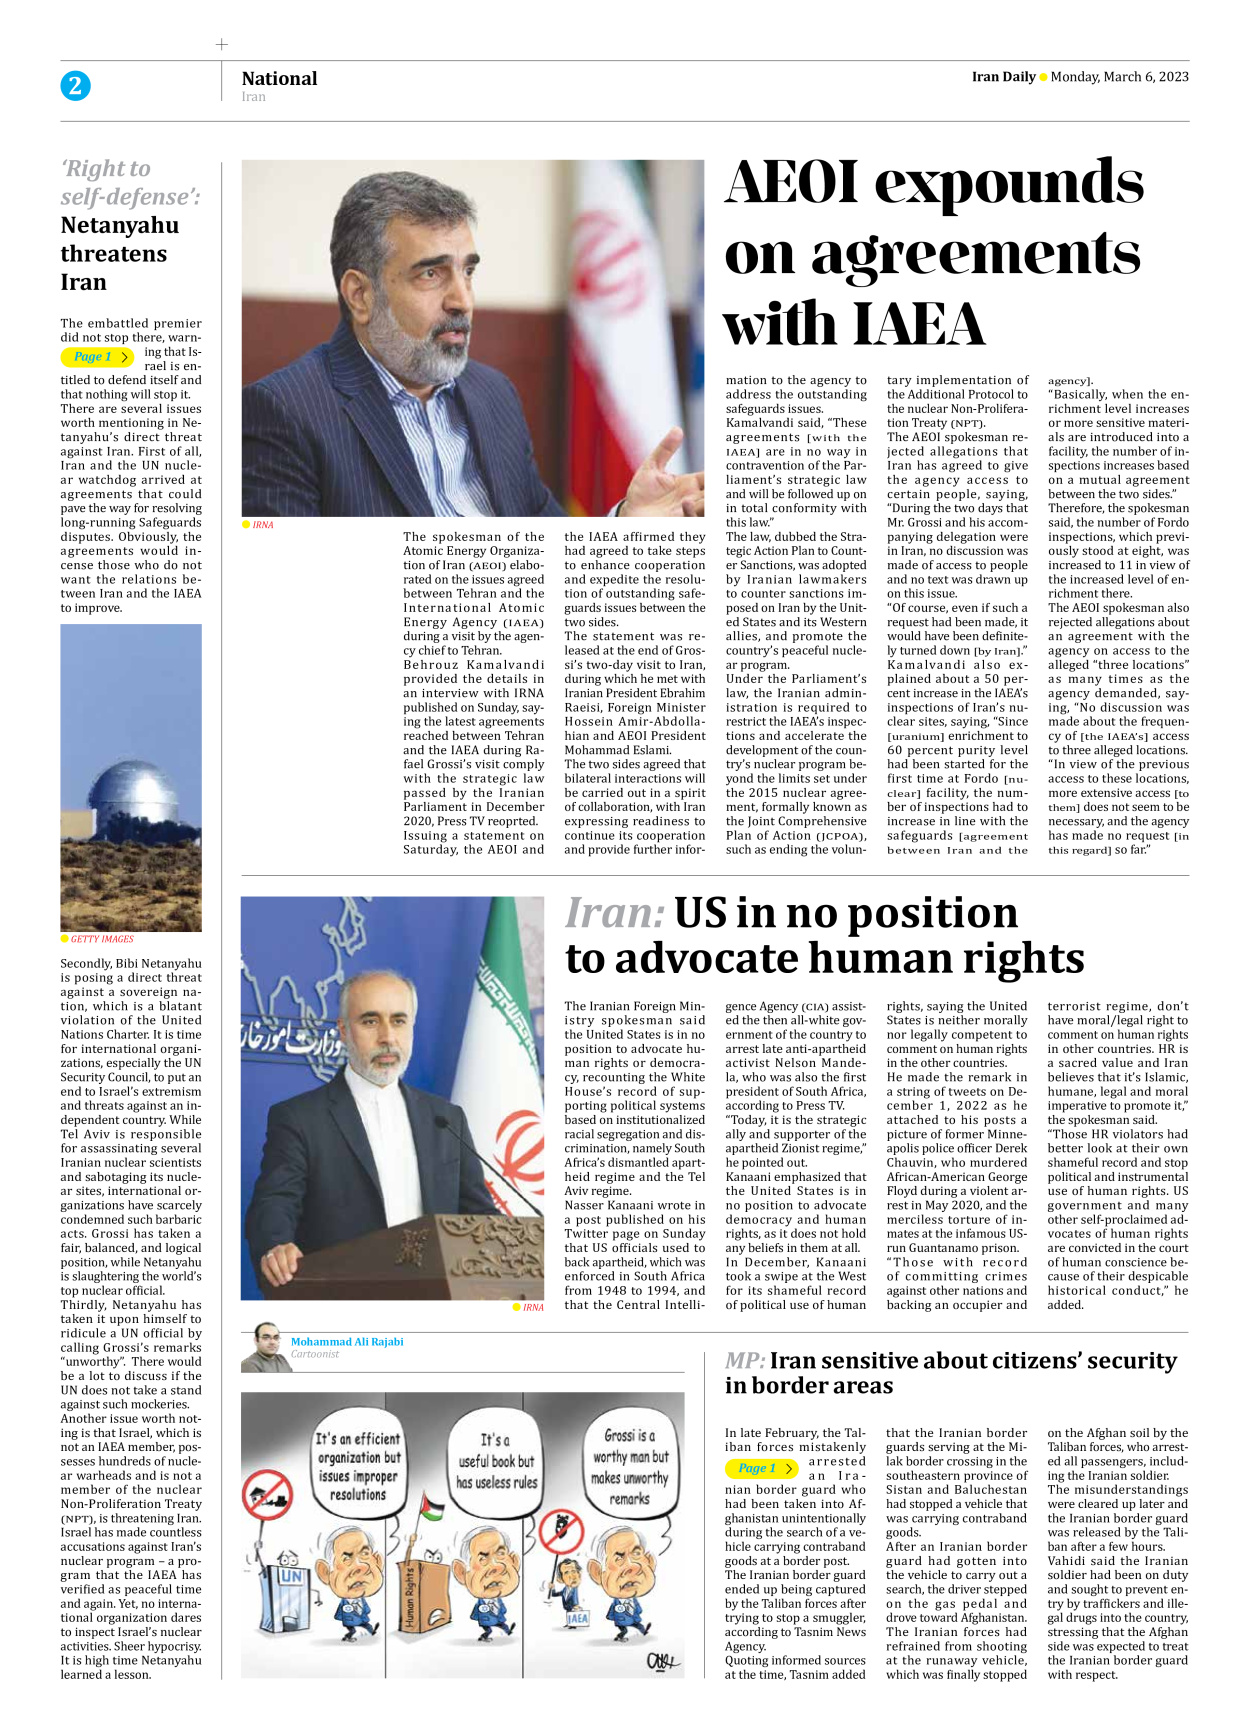 Iran Daily - Number Seven Thousand Two Hundred and Fifty Two - 06 March 2023 - Page 2